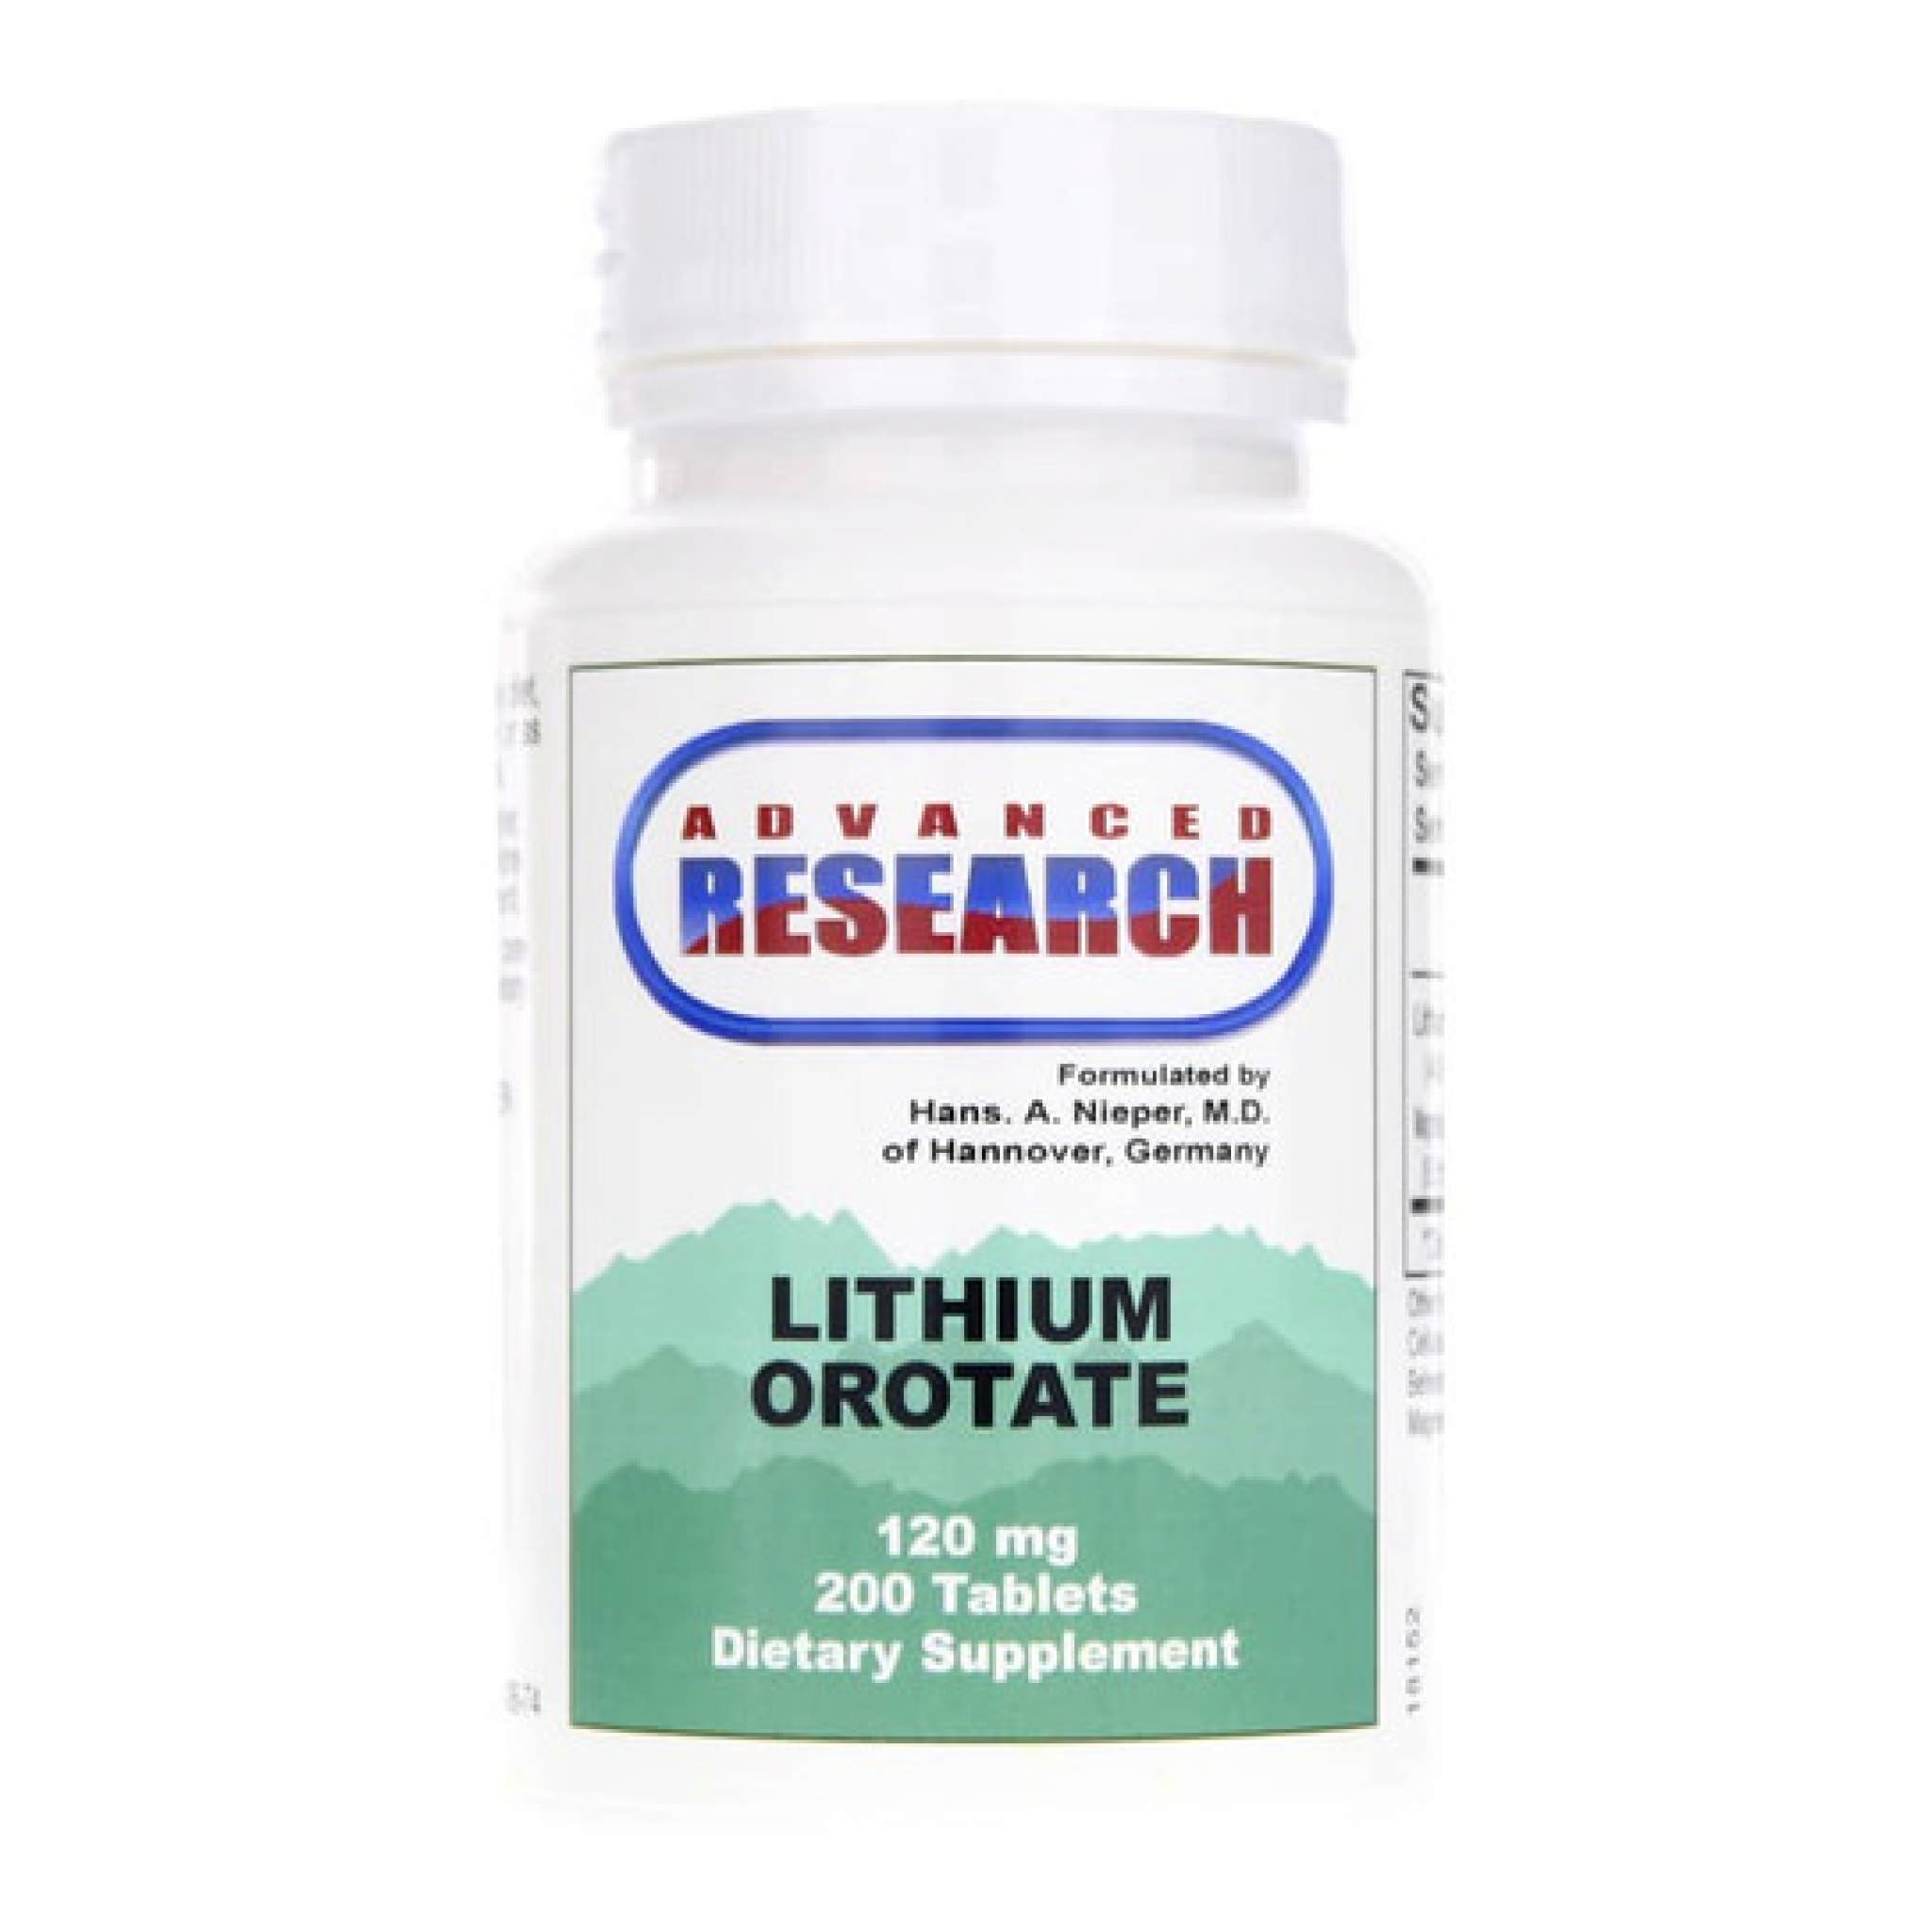 Advanced Research - Lithium Orotate